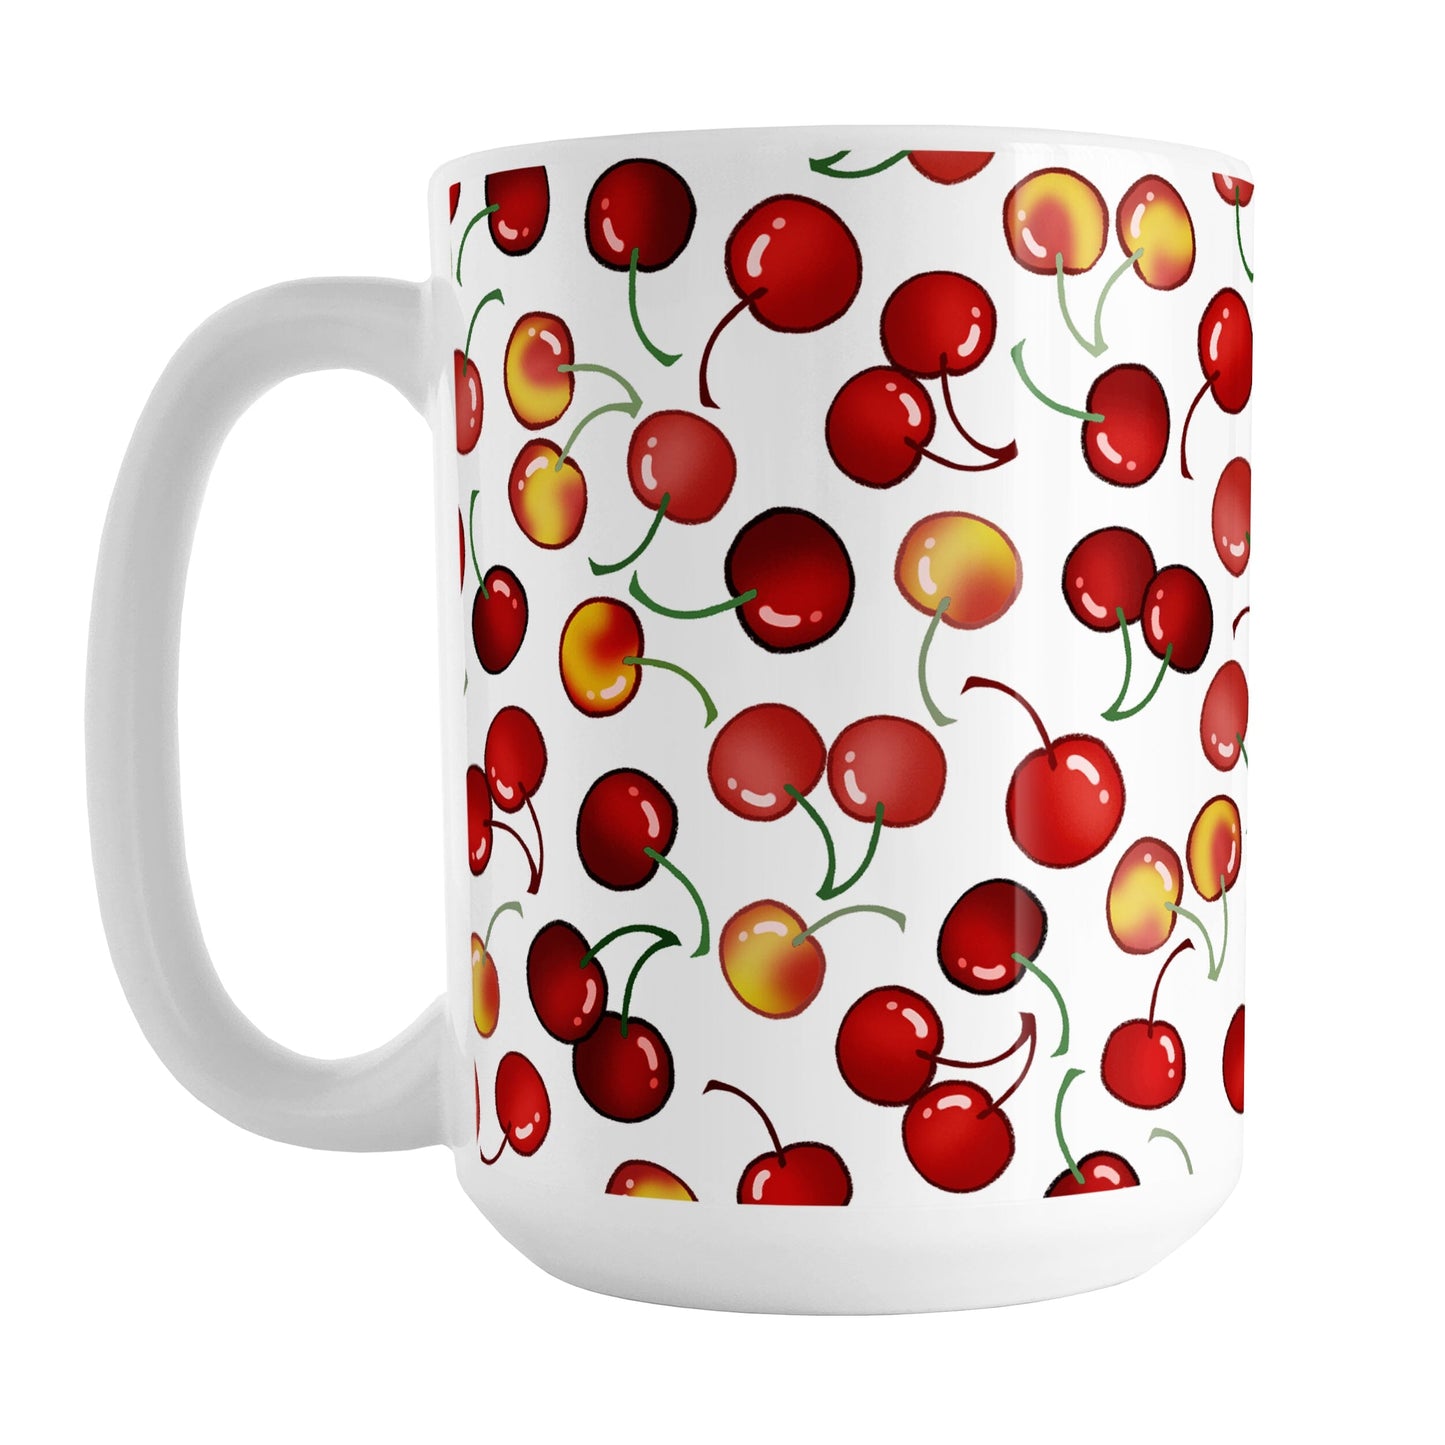 Cherries Mug (15oz) at Amy's Coffee Mugs. A ceramic coffee mug designed with different colors and types of cherries in a pattern that wraps around the mug to the handle.